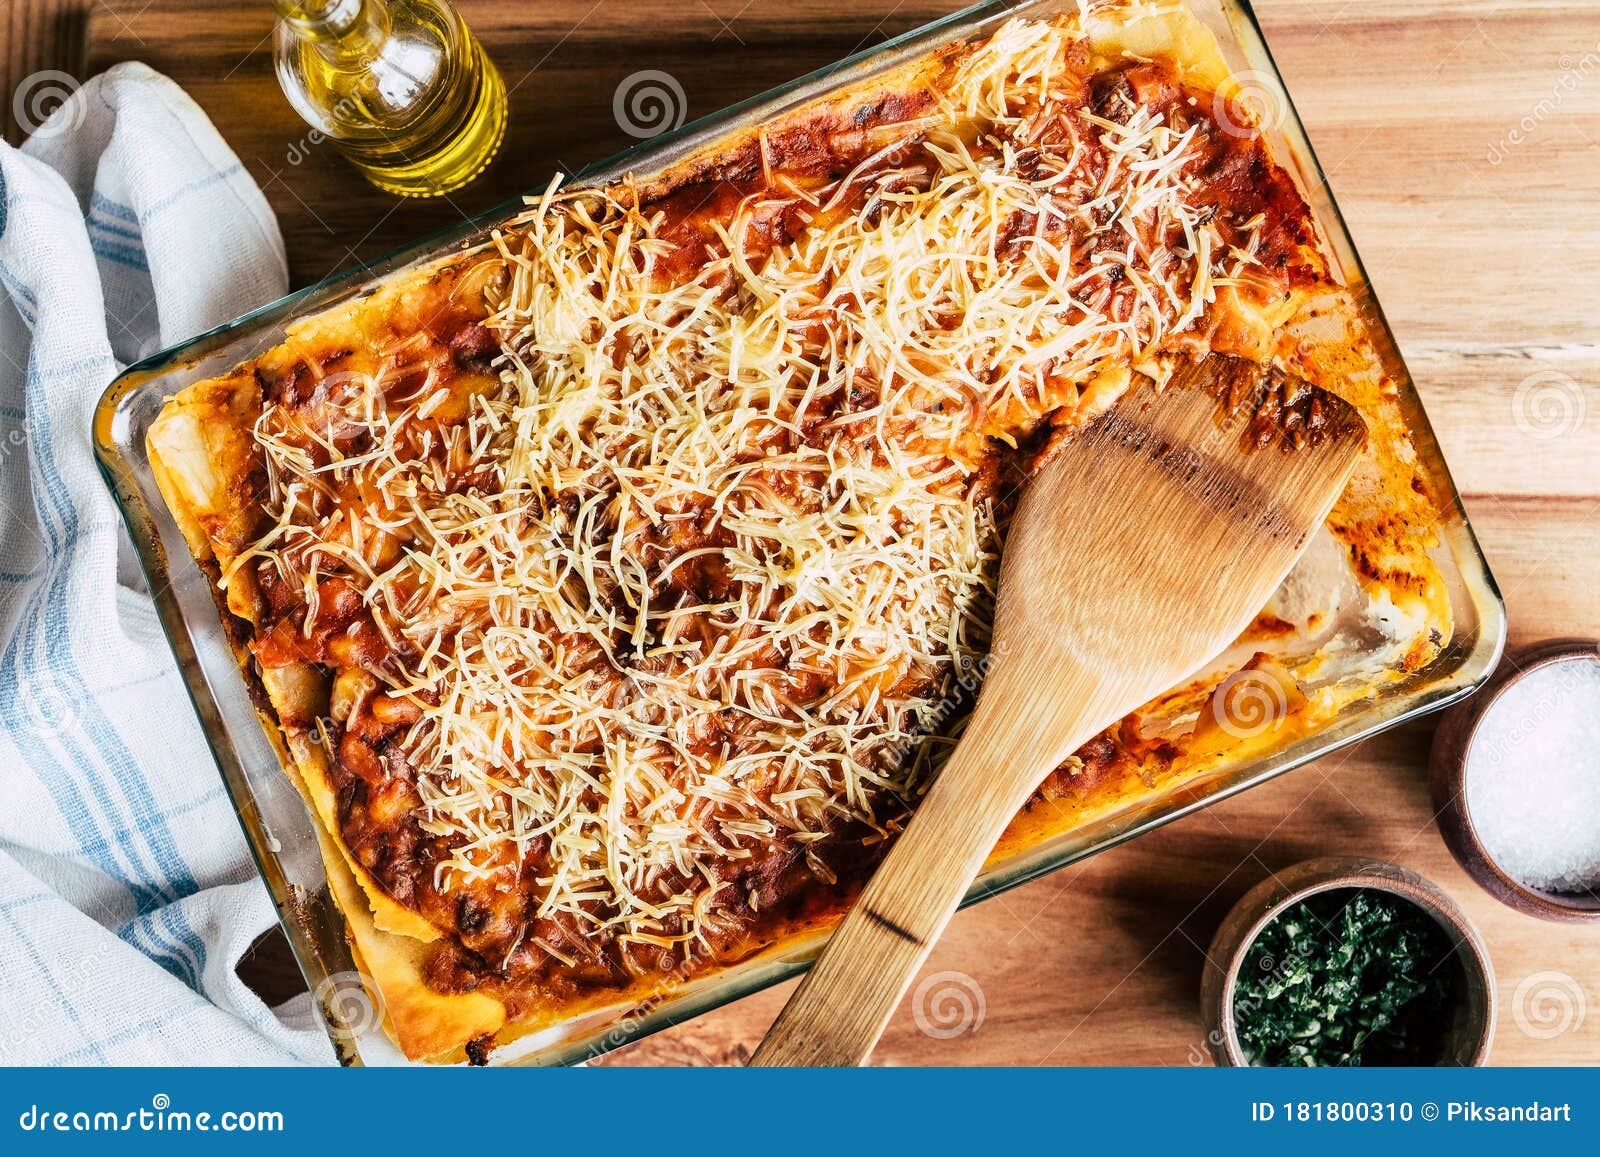 Dish of Bolognese Lasagna Gratin with Wooden Spoon To Serve Stock Photo ...